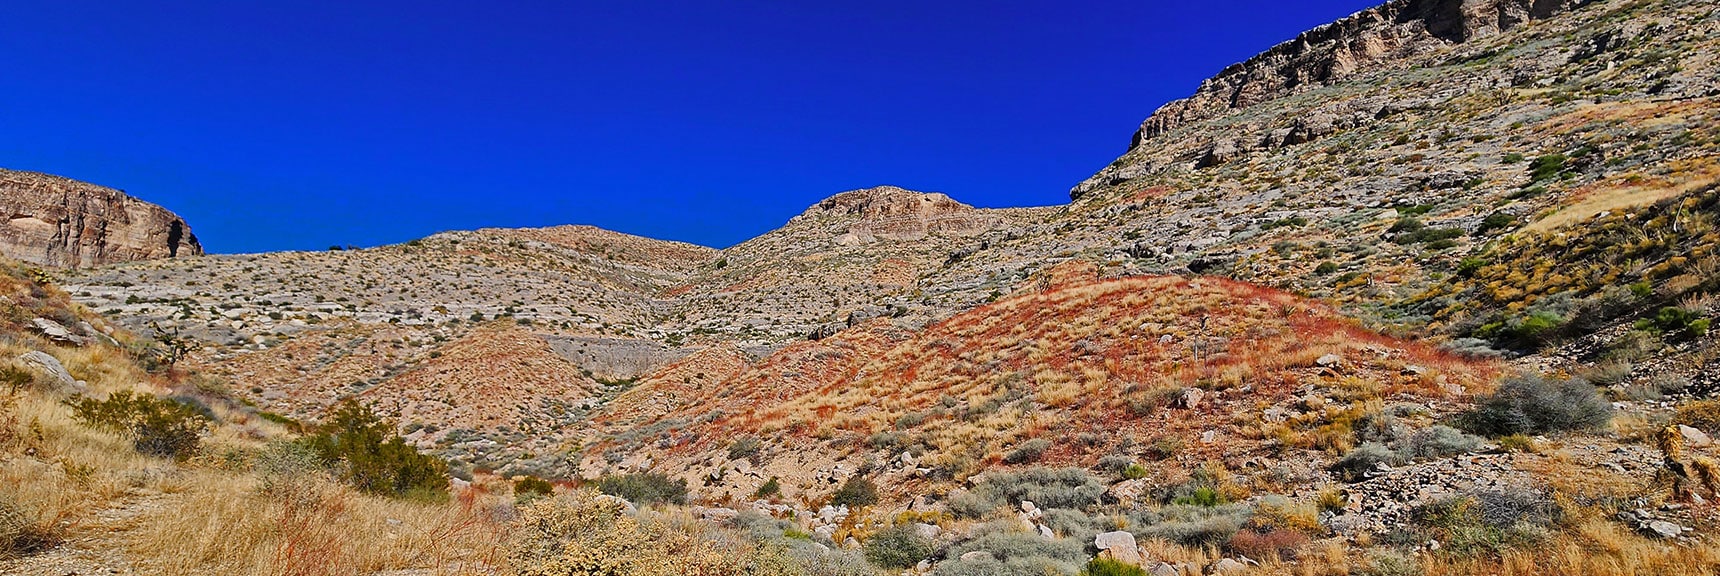 Bluff's Western Summit Line Ahead in Mule Spring Canyon | Landmark Bluff | Lovell Canyon, Nevada